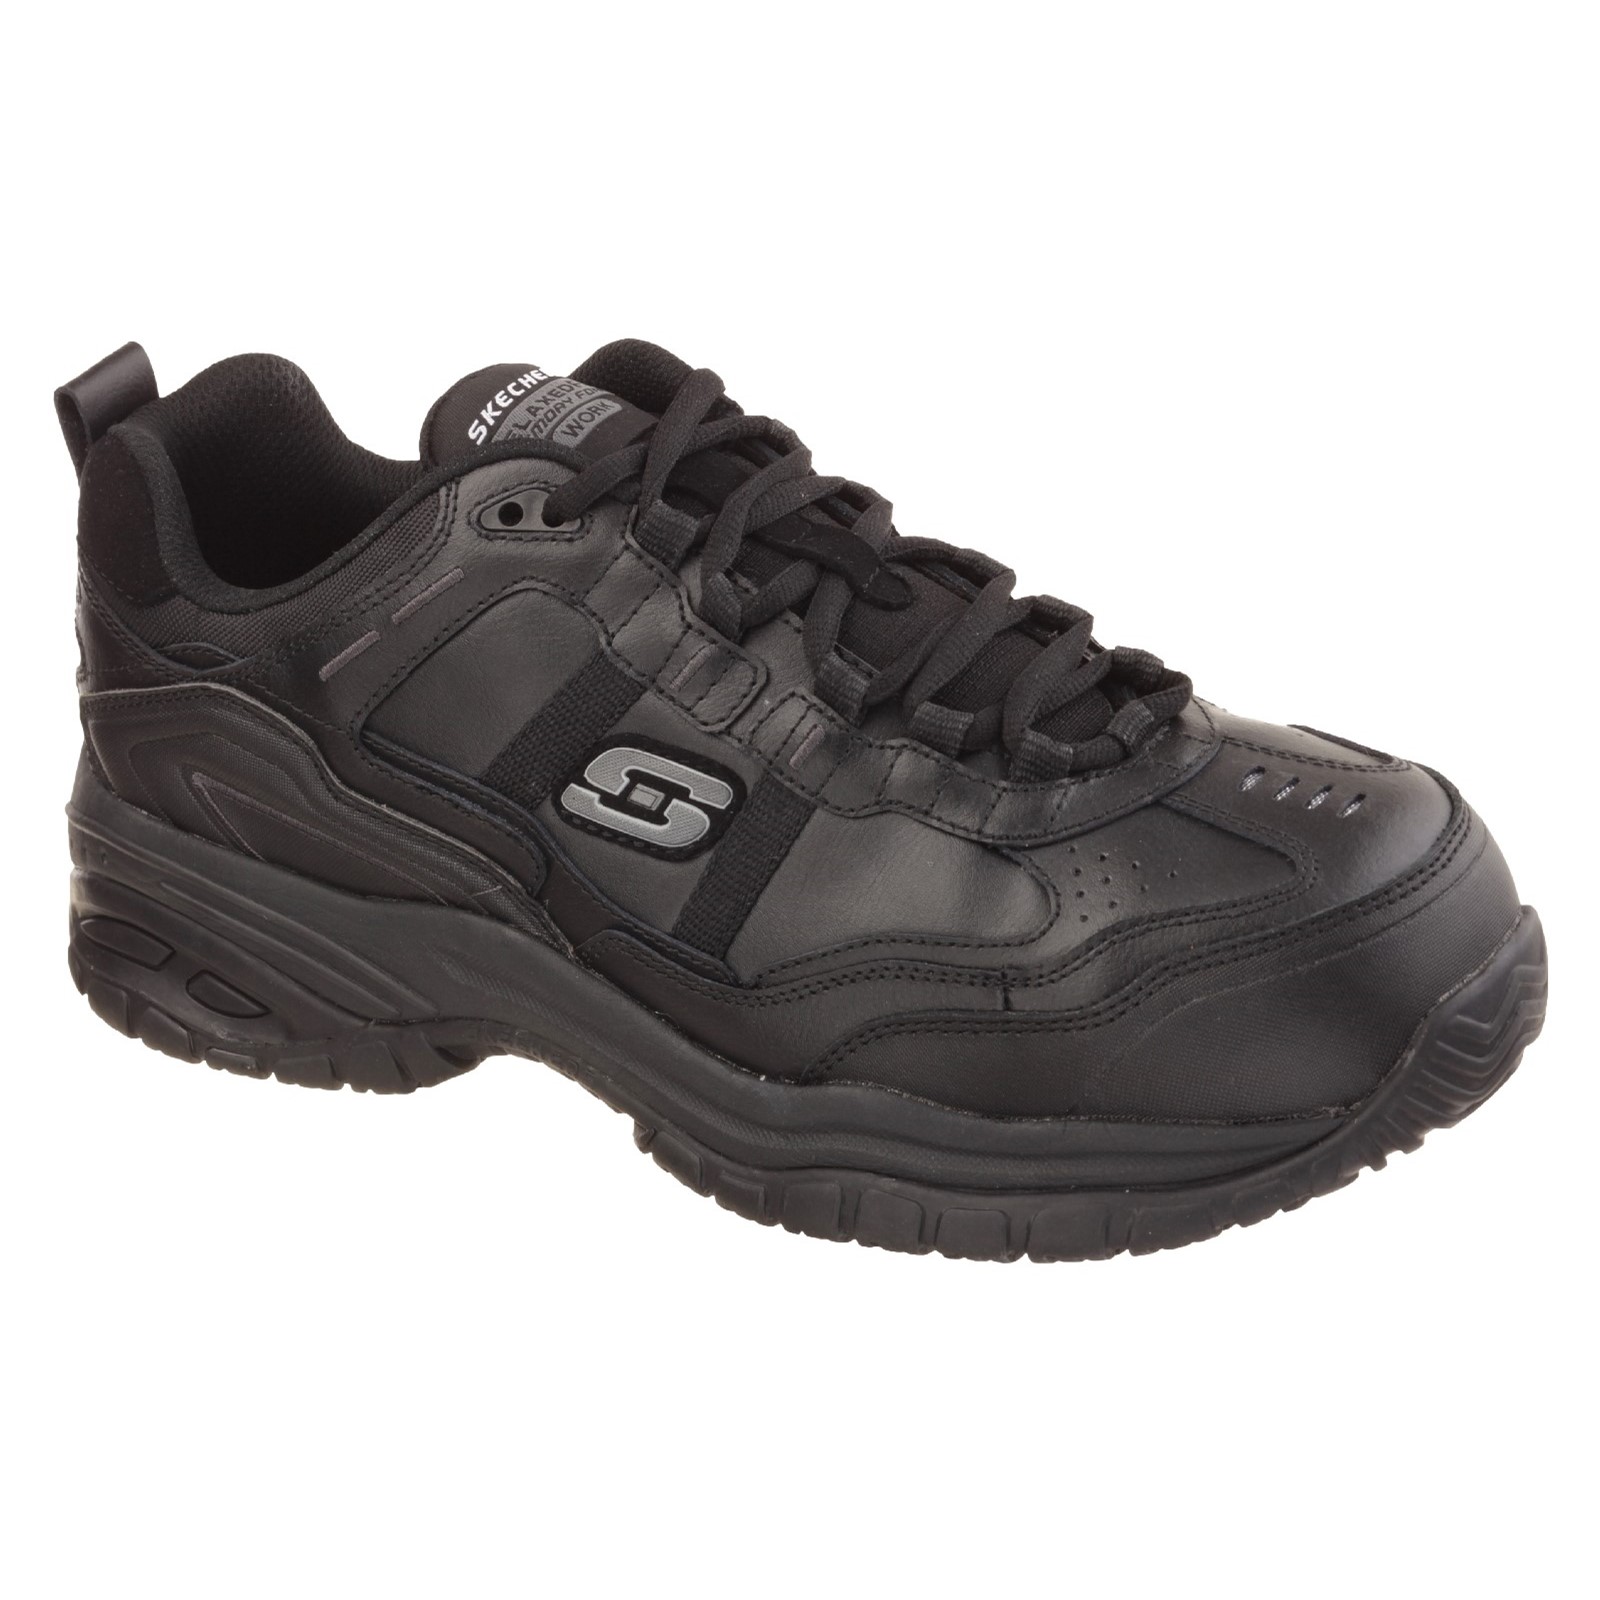 Soft Stride - Grinnell Lace Up Safety Shoe